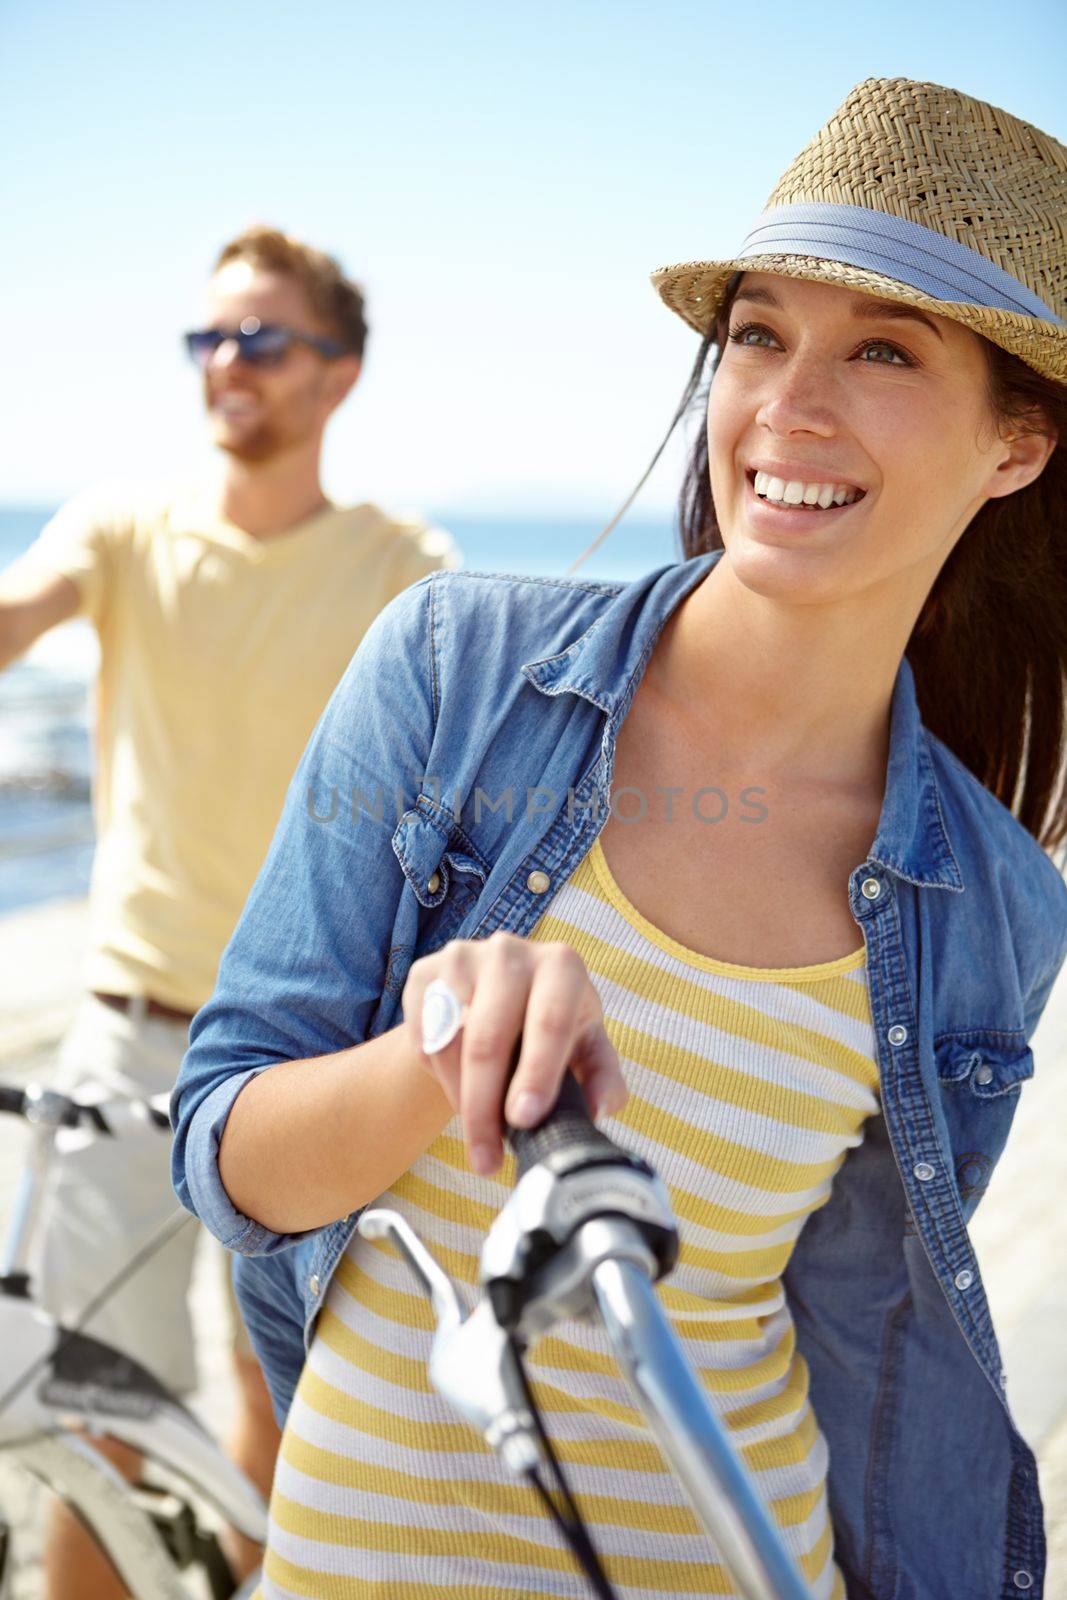 Bike, travel and couple with a woman on summer vacation or holiday riding on the promenade by the beach. Freedom, date and romance with a girlfriend outdoor for a ride on the coast during the day by YuriArcurs